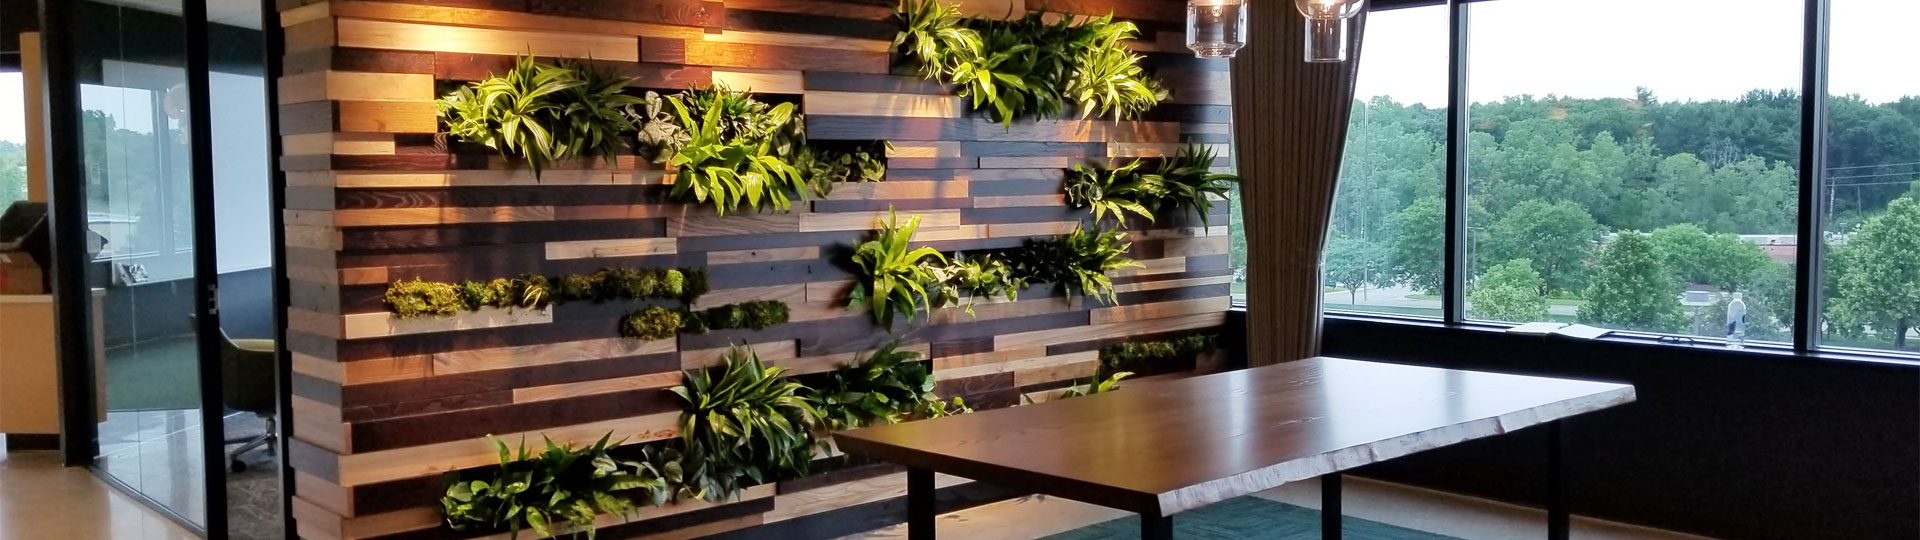 Living Wall inside a commercial office building